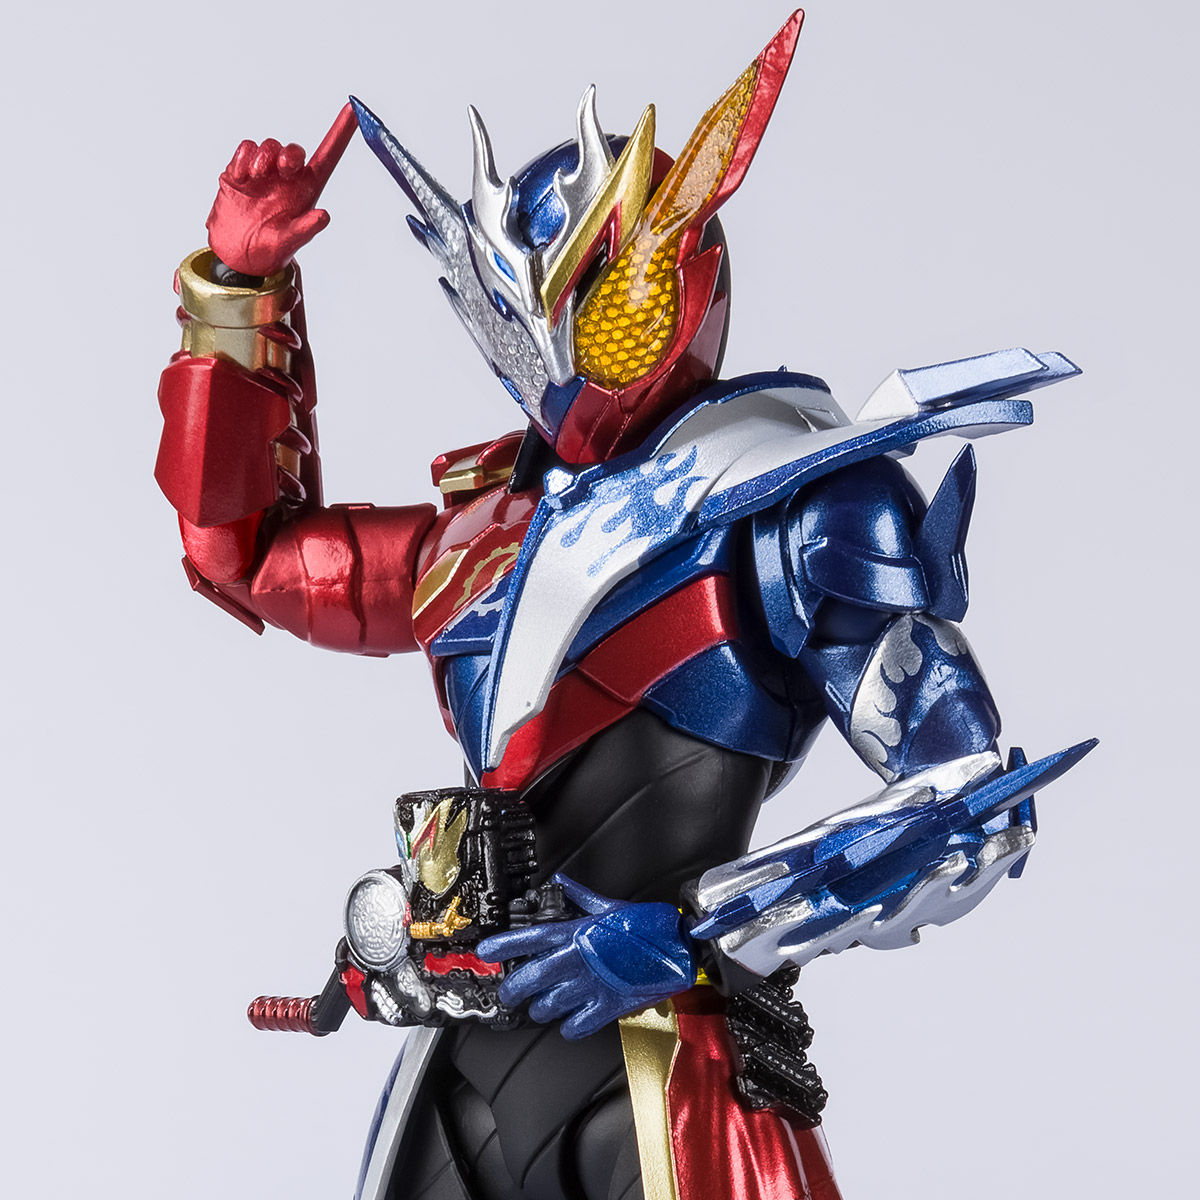 s.h.figuarts 仮面ライダービルド関連 まとめ売り - library 